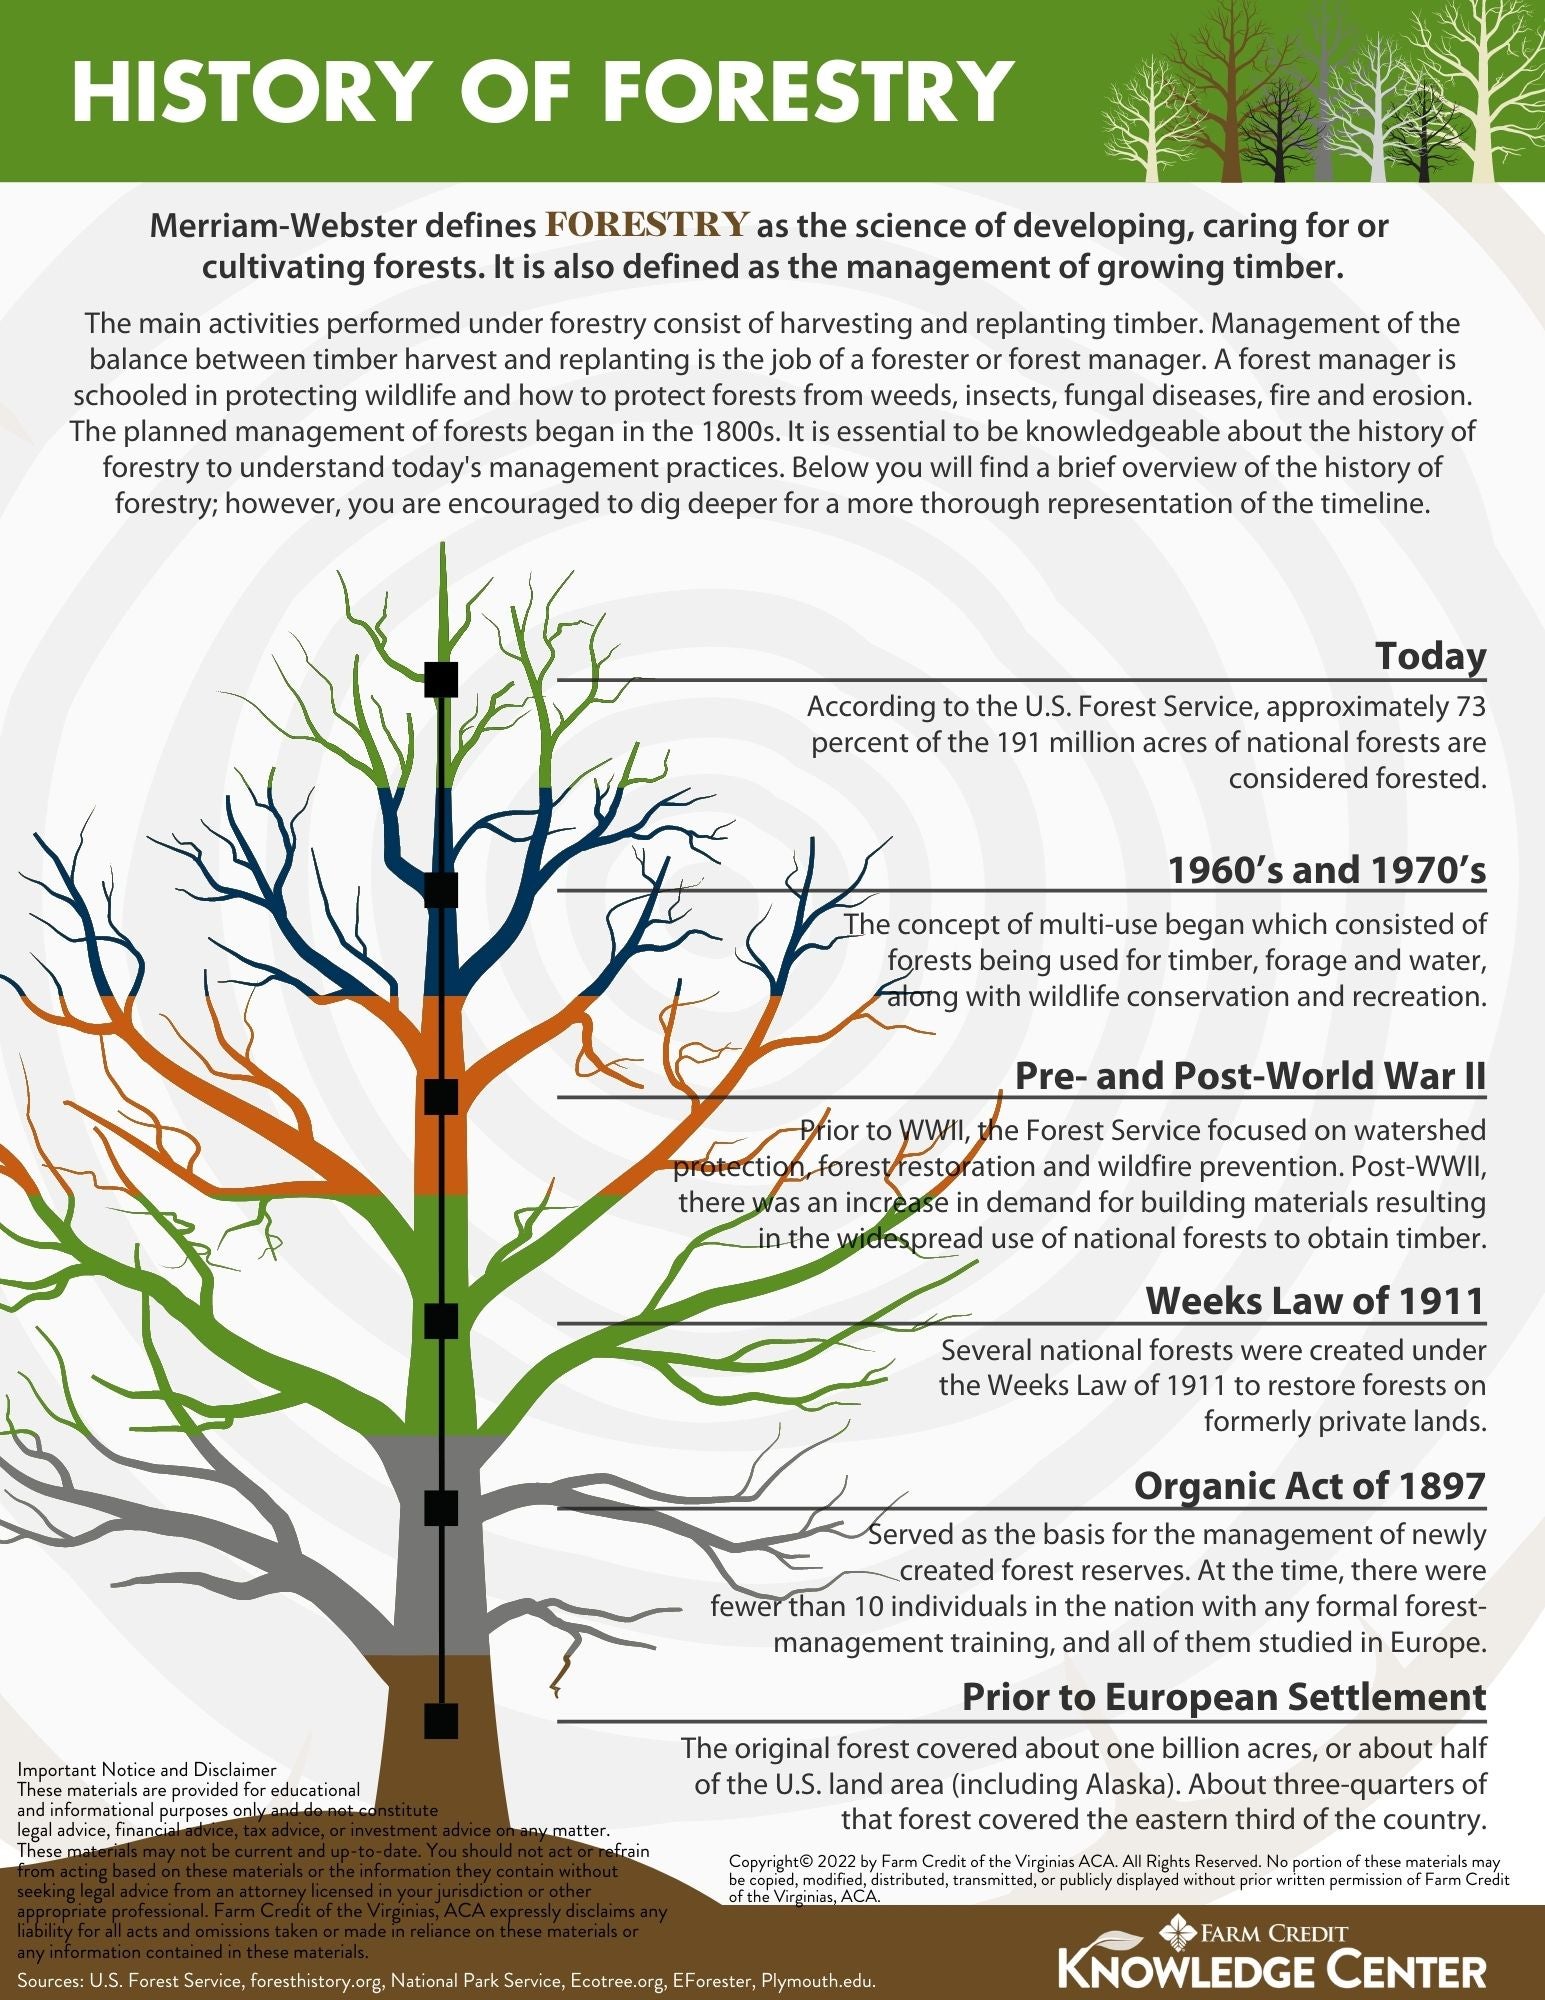 History of Forestry Infographic Image